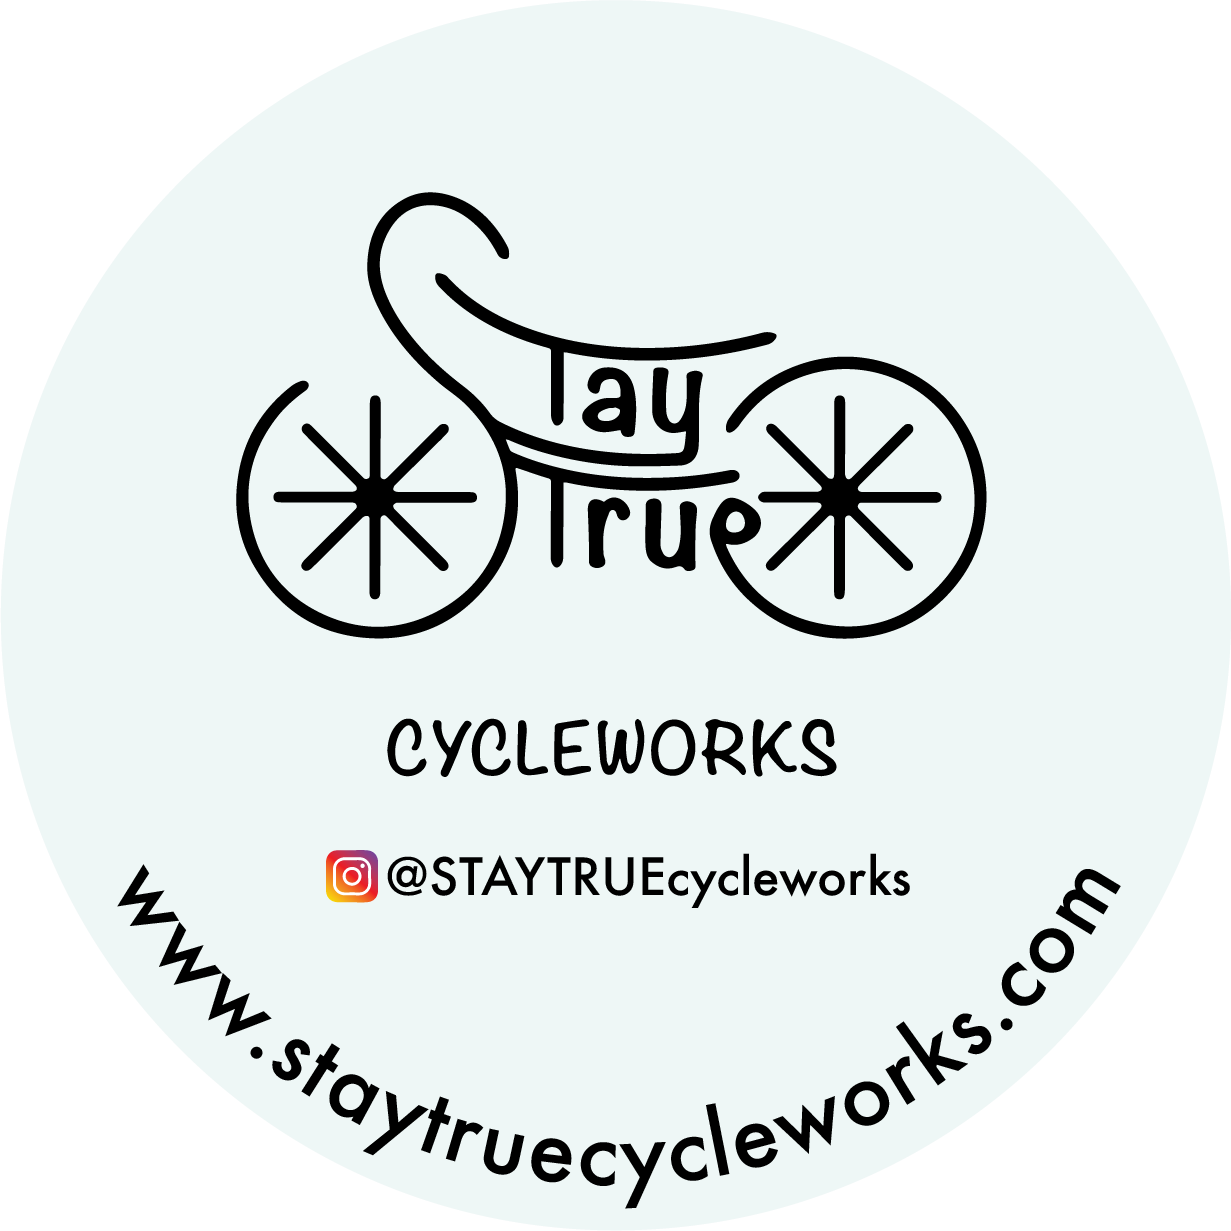 http://www.pedalaheadsd.org/wp-content/uploads/2022/11/Stay-True-Cycleworks-LOGO-VECTOR_1641491820.png